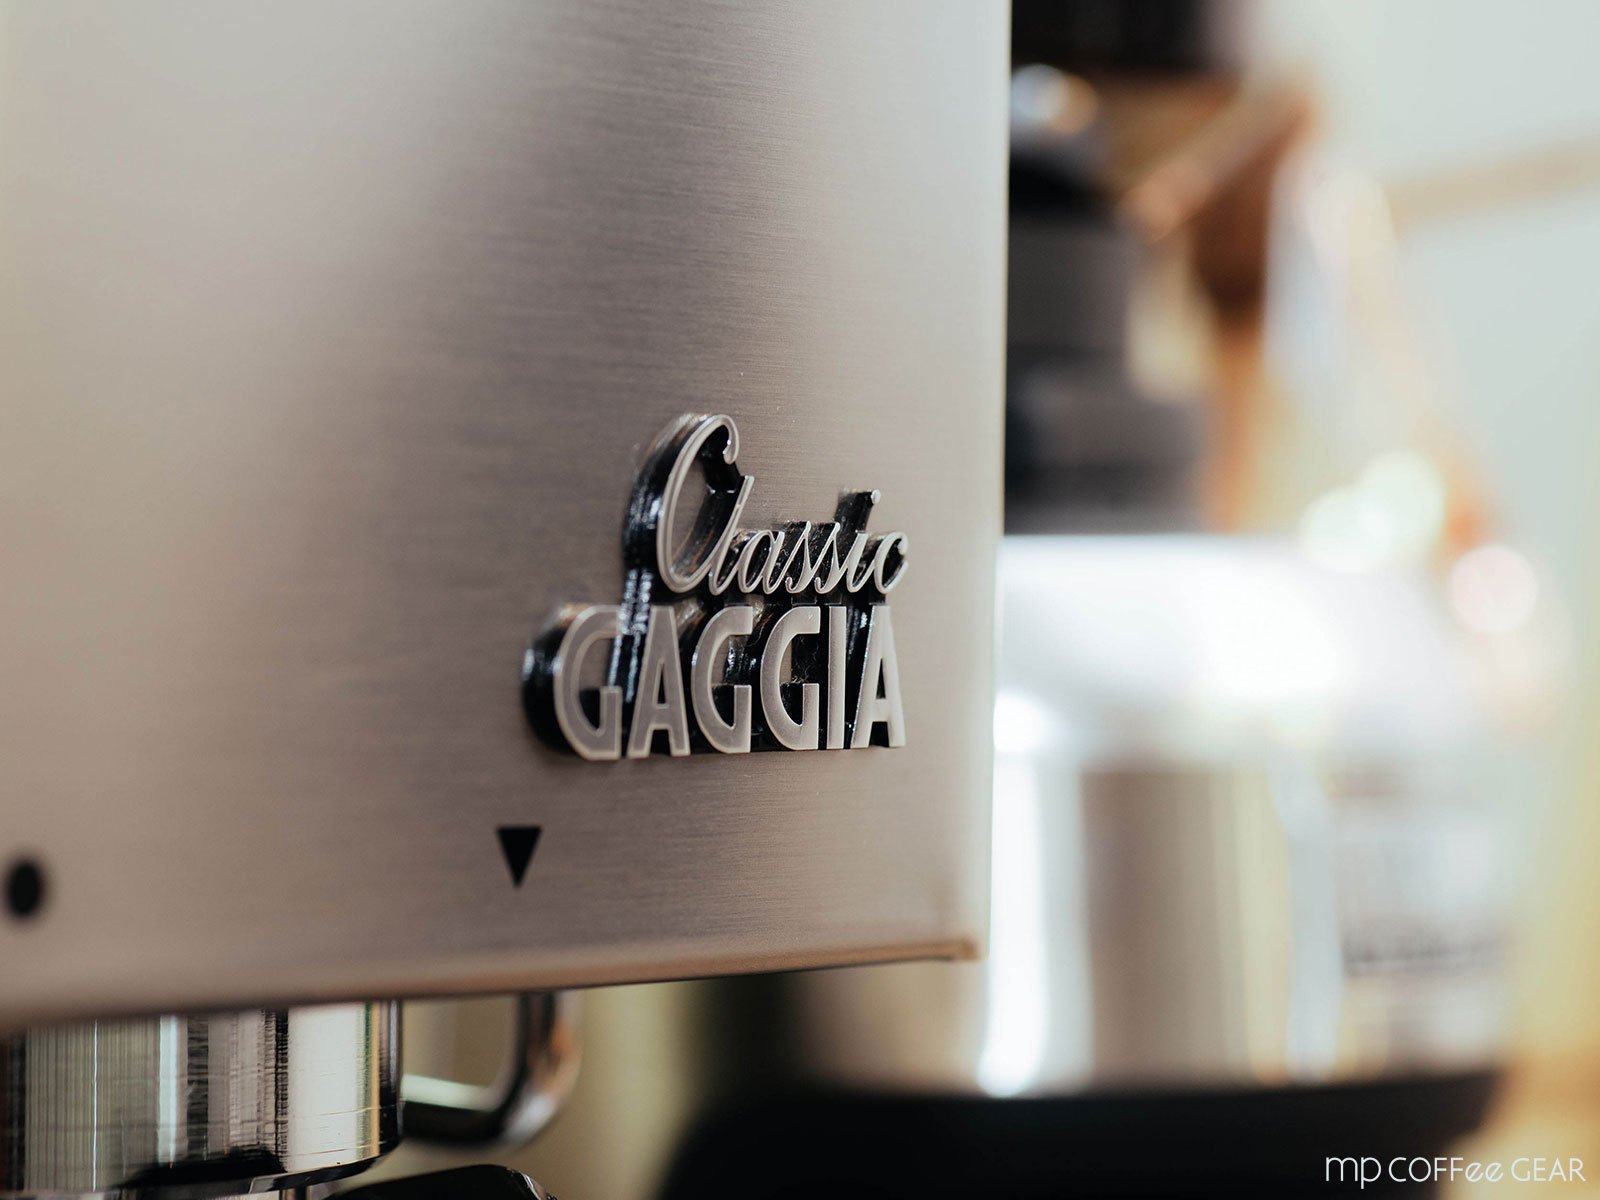 mp coffee gear 【キャンペーン中！】GAGGIA ガジア セミオートエスプレッソマシン Classic クラシック<img class='new_mark_img2' src='https://img.shop-pro.jp/img/new/icons25.gif' style='border:none;display:inline;margin:0px;padding:0px;width:auto;' />